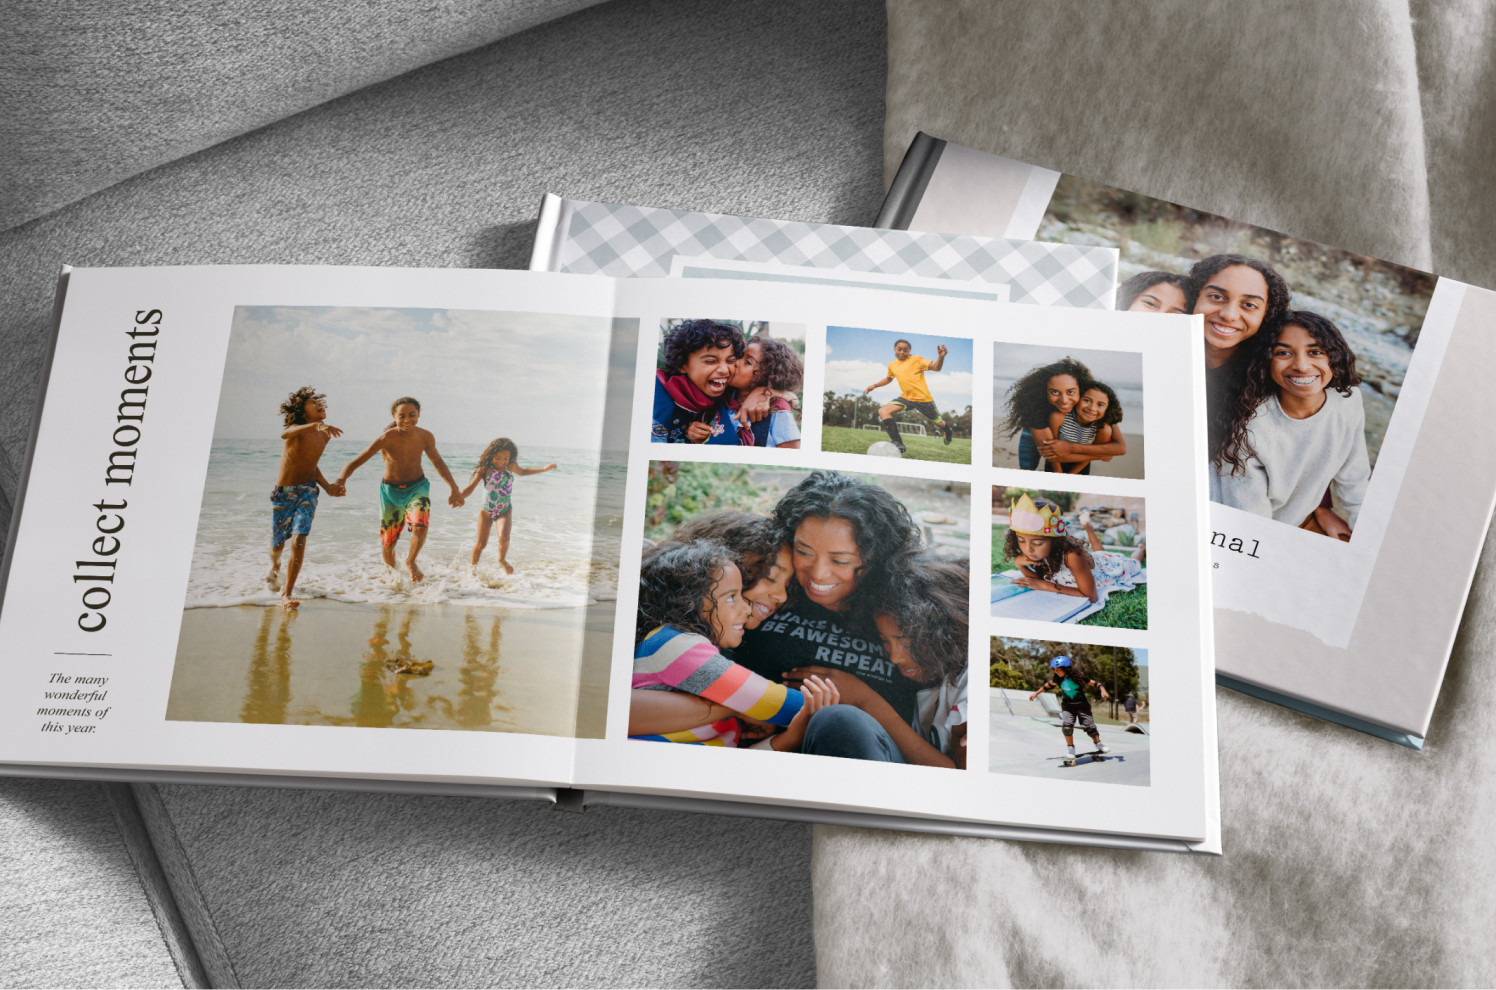 Jumbo Hard Cover All-In-One Combination Photo Album and Scrapbook Binder